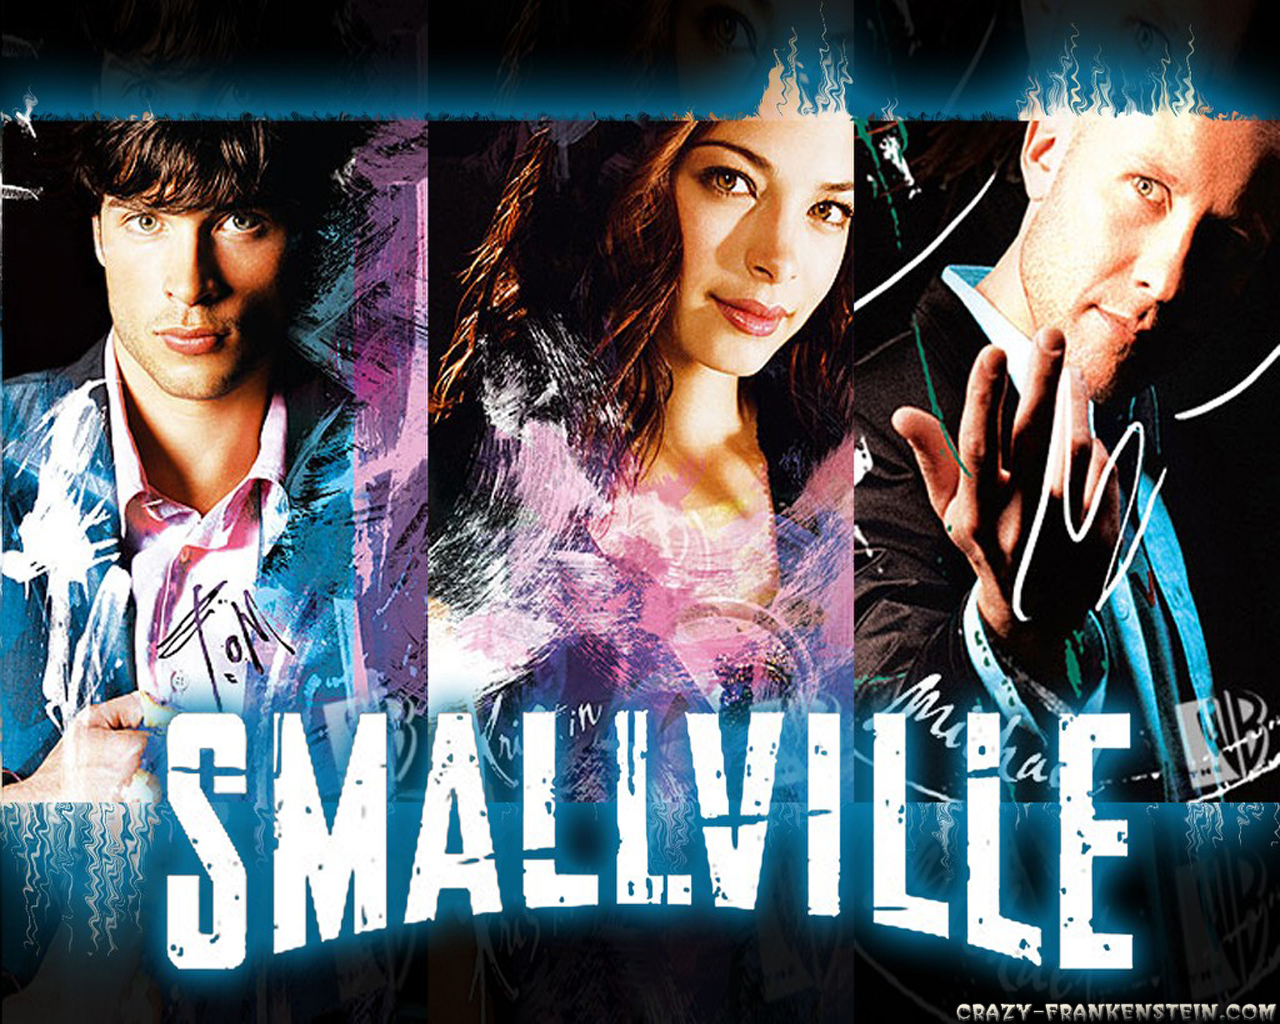 Smallville Wallpaper And Background Image